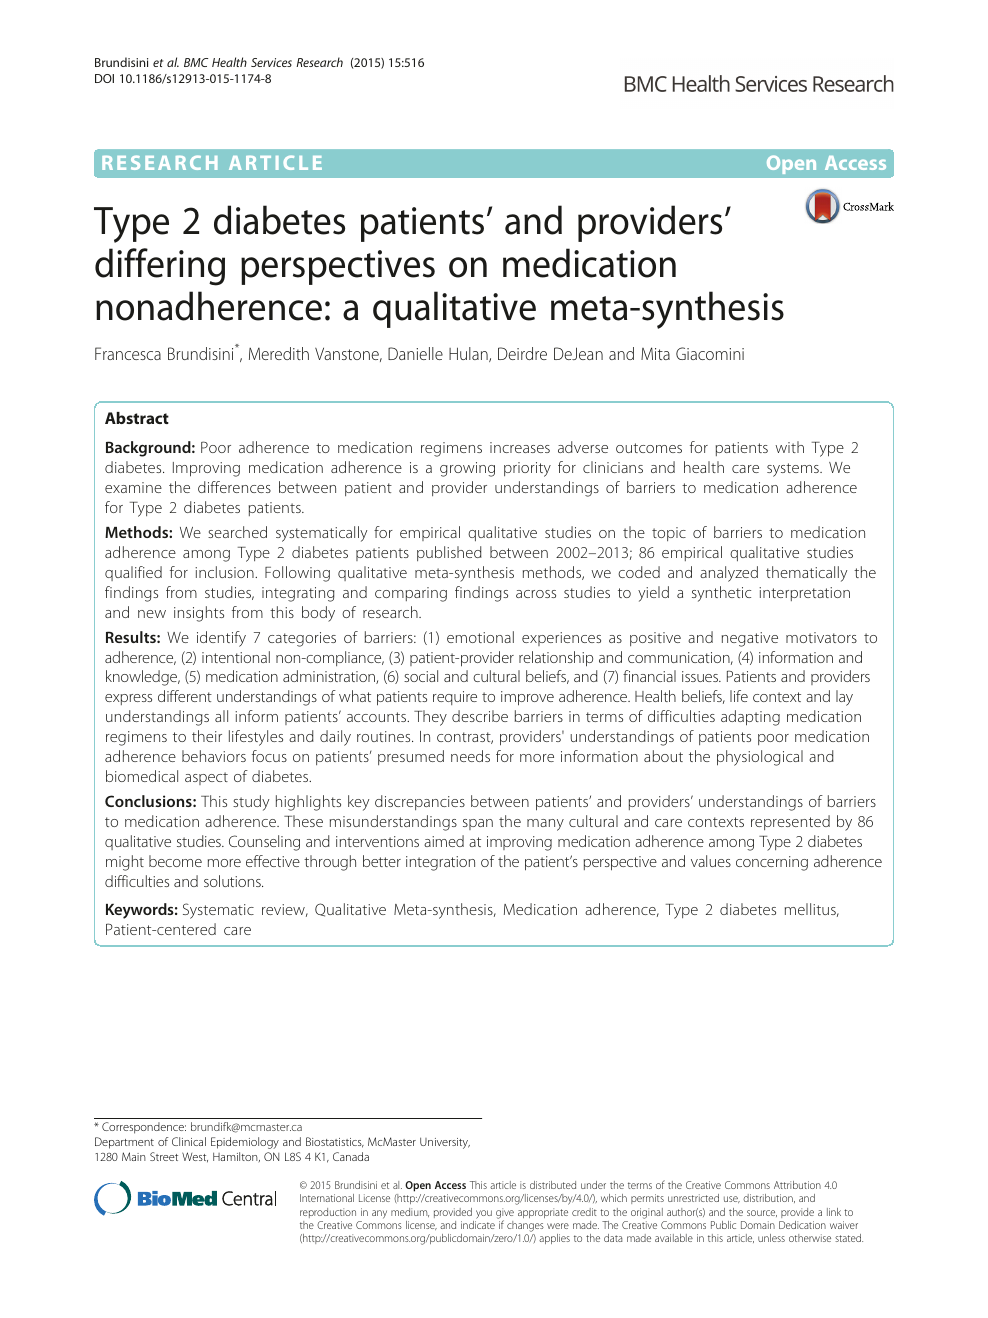 research articles on diabetes type 2